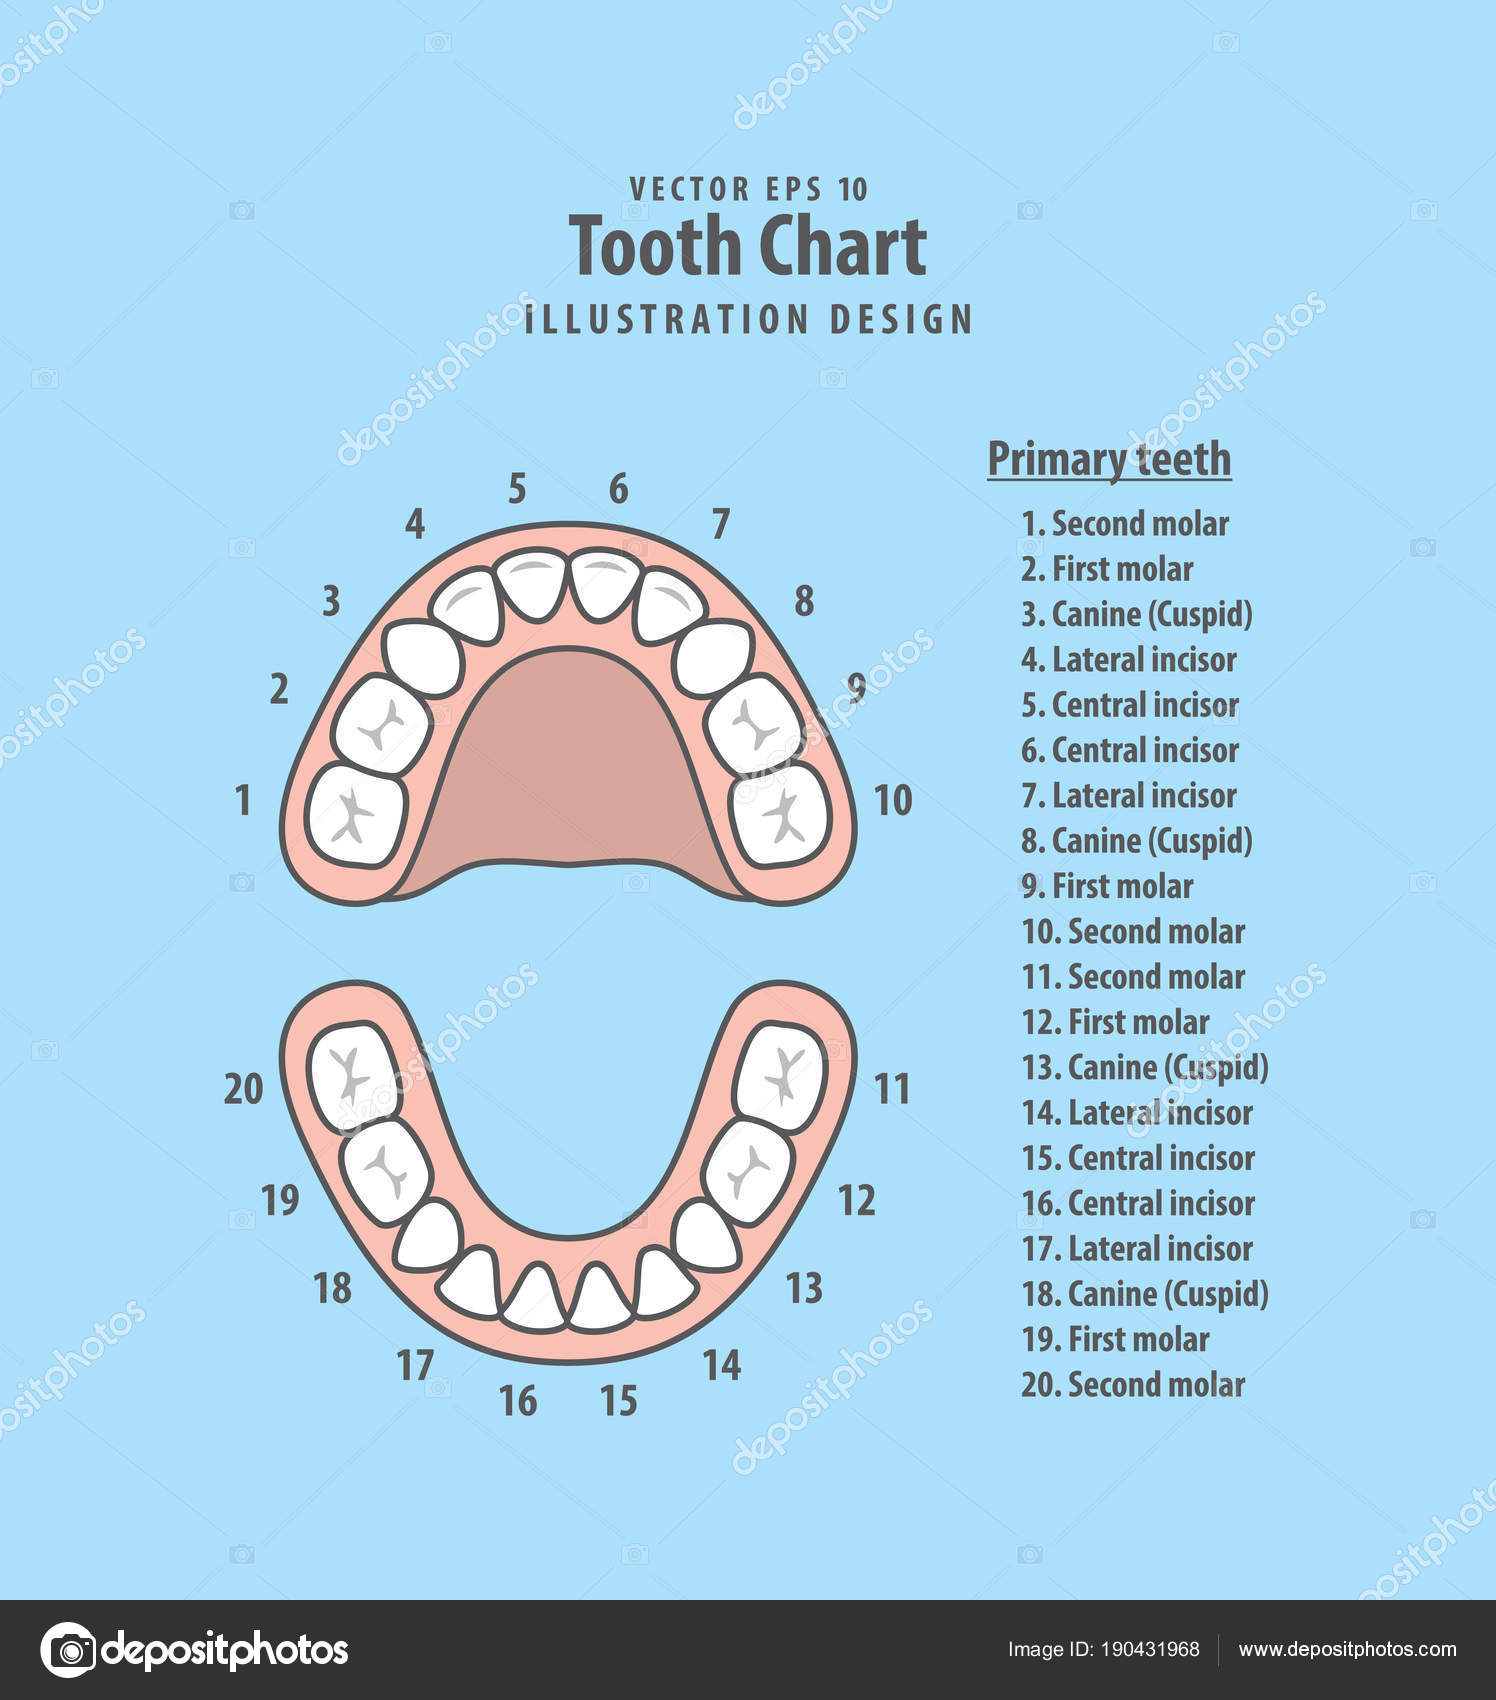 Diagram Of Teeth Tooth Chart Primary Teeth With Number Illustration Vector On Blu